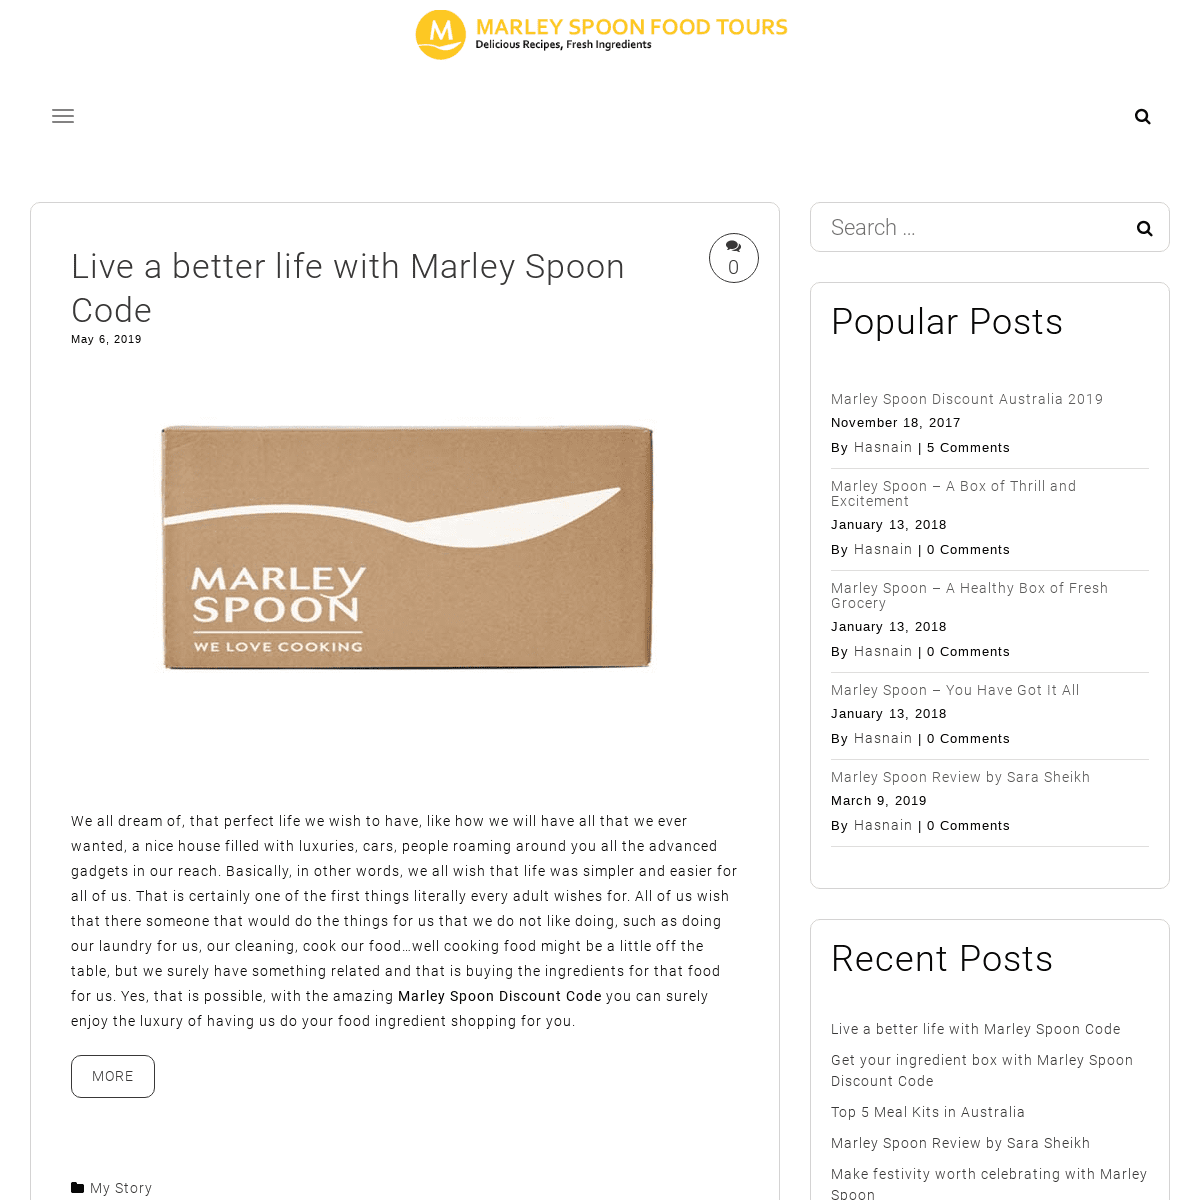 Marley Spoon Food Tours - Take a tour of Marley Spoon recipes and discounts